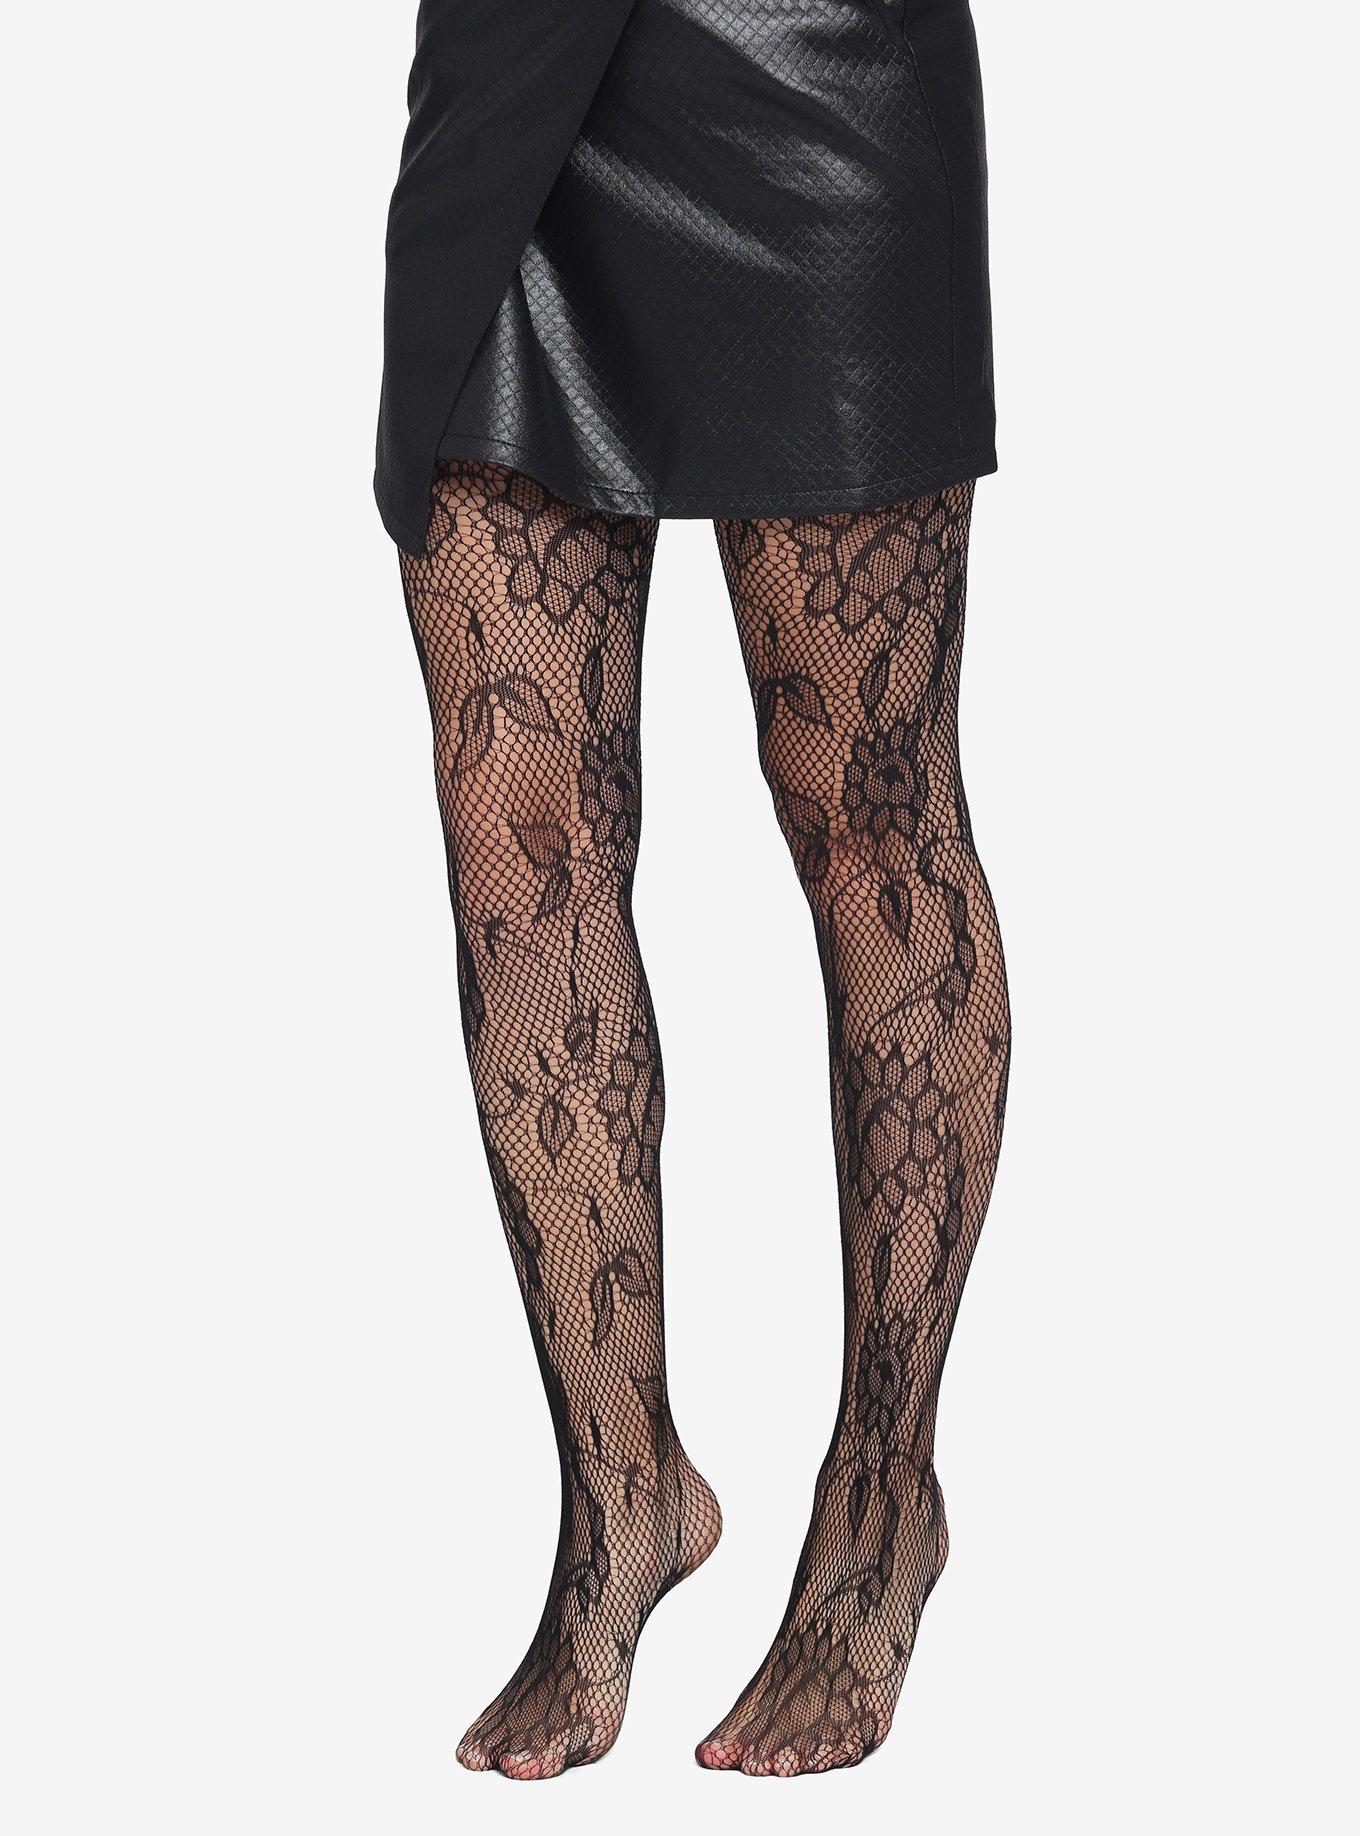 Fishnet tights with floral pattern